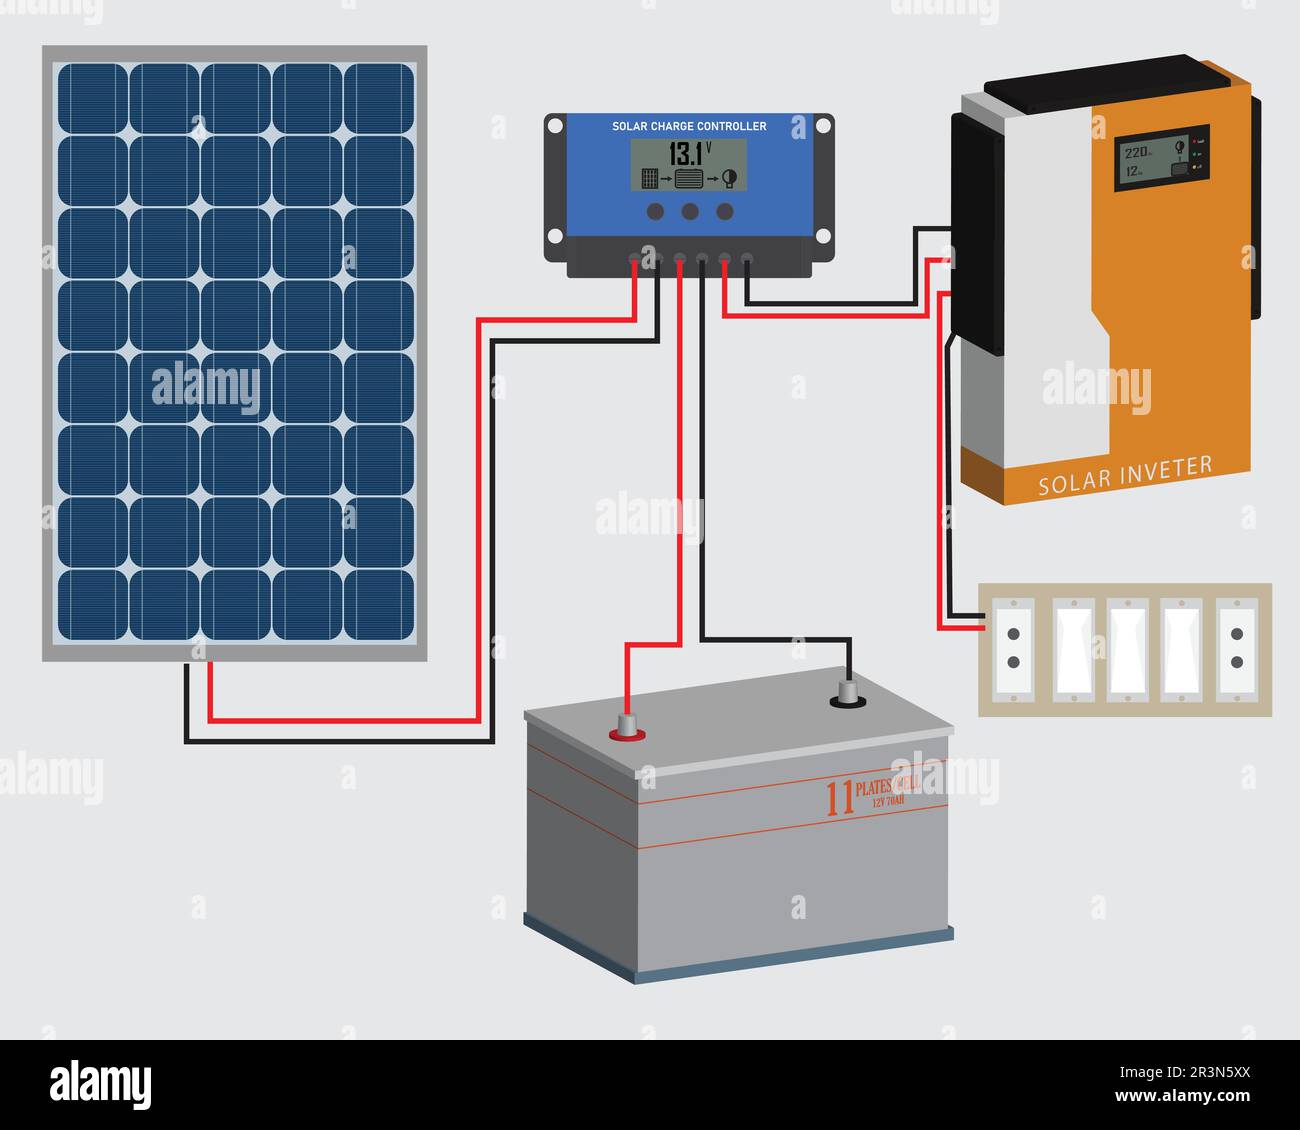 solar plate connected to inverter viva controller and backup battery is attached. Home solar installation concept Stock Vector